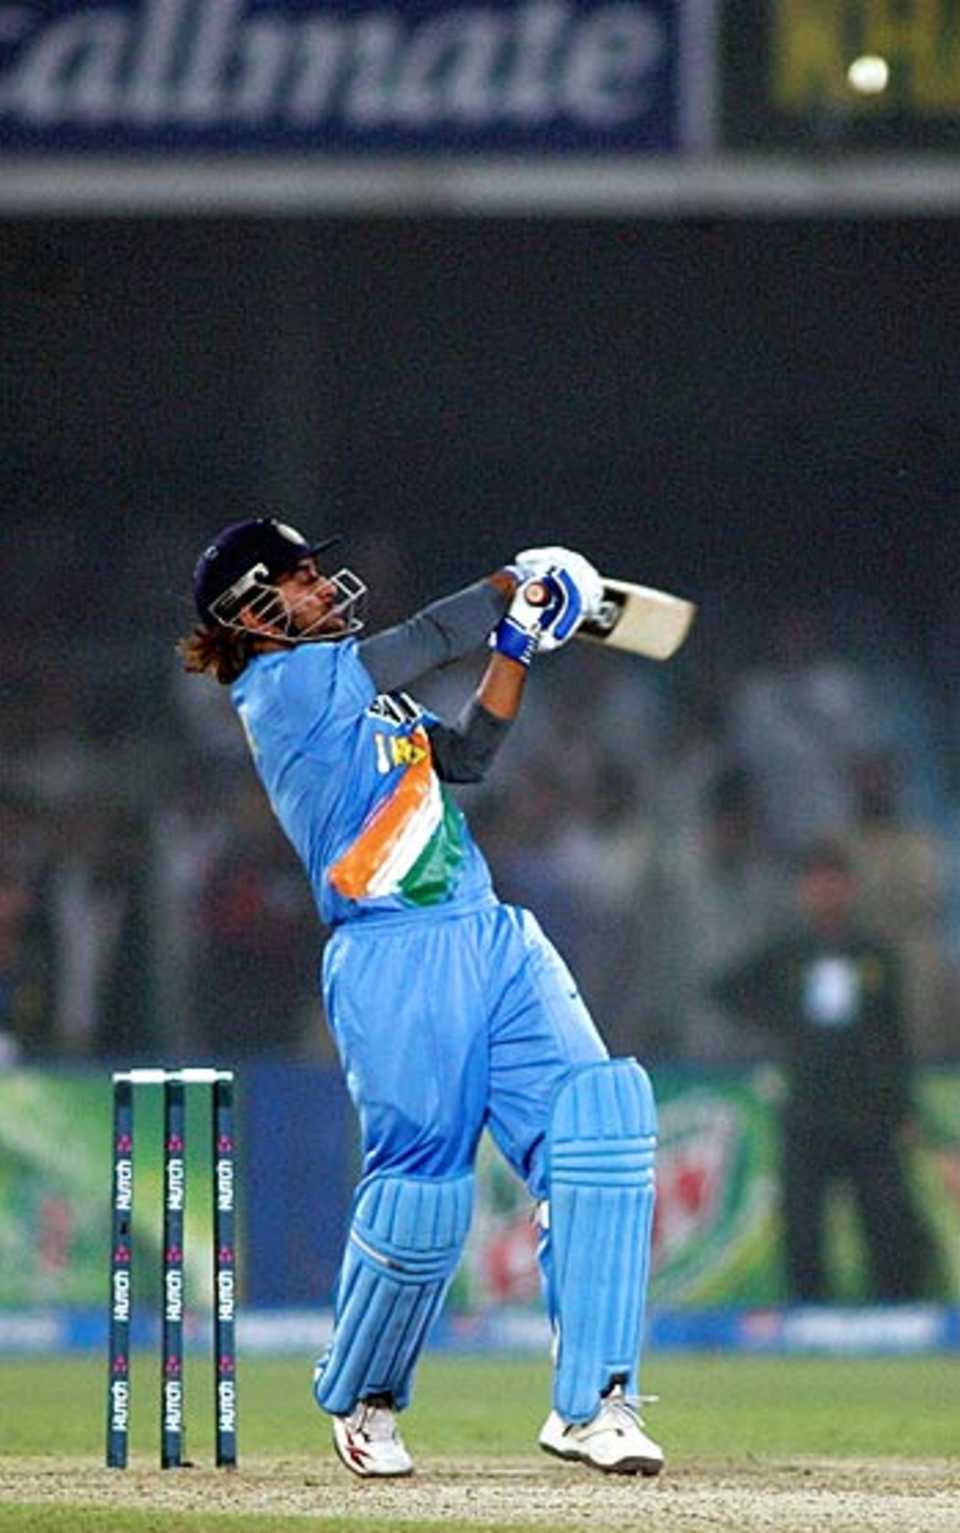 Mahendra Singh Dhoni pounded 72 from 46 balls